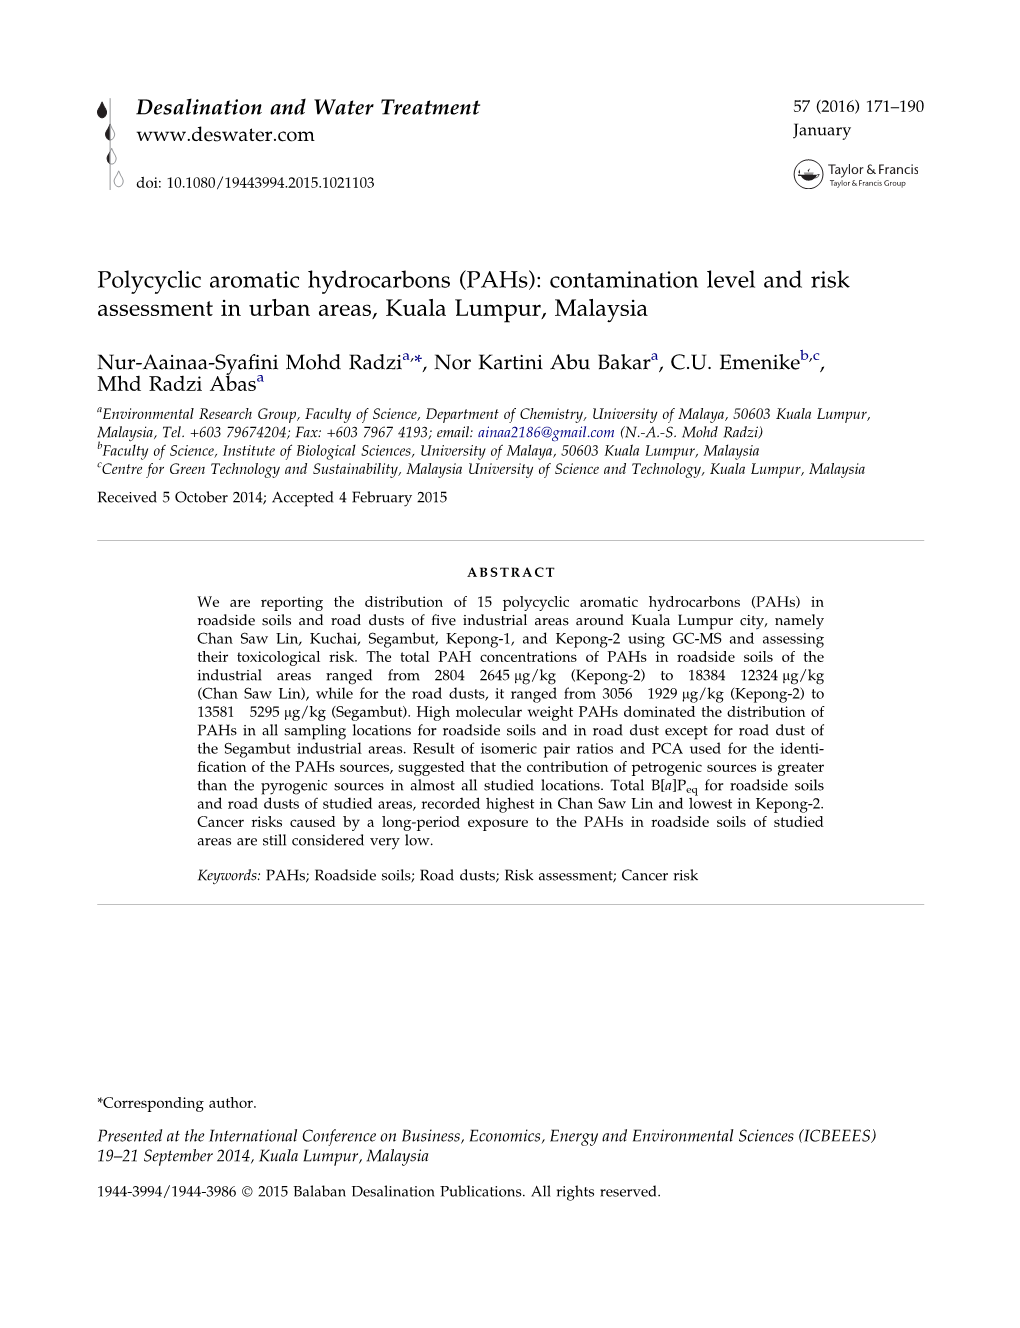 Polycyclic Aromatic Hydrocarbons (Pahs): Contamination Level and Risk Assessment in Urban Areas, Kuala Lumpur, Malaysia